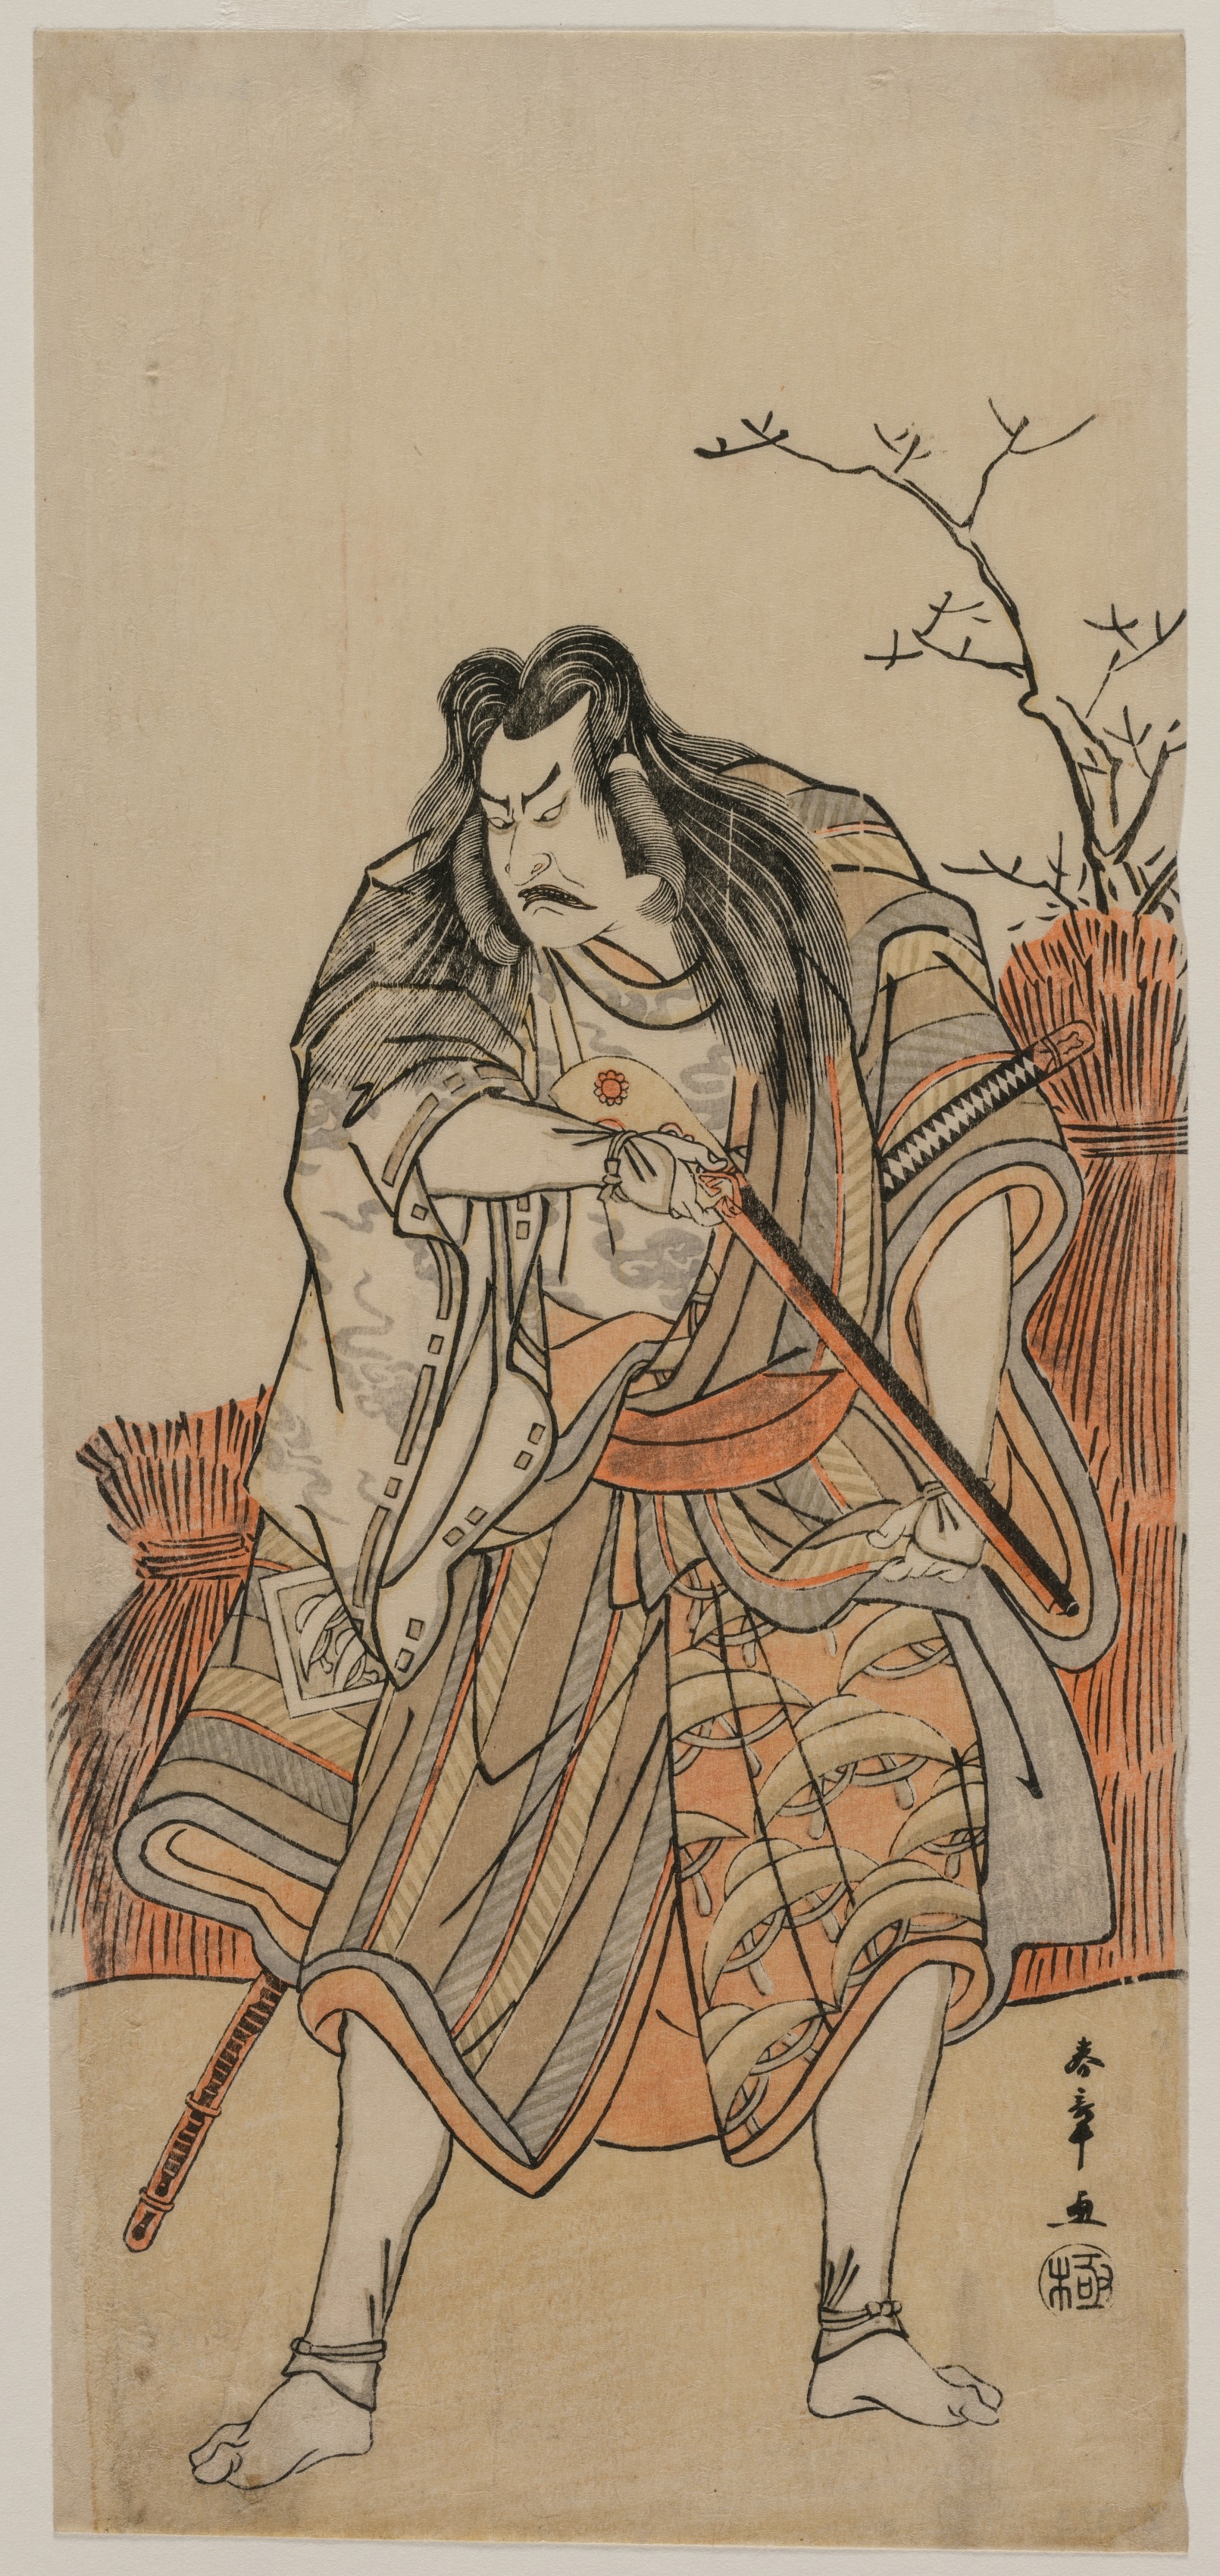 Nakajima Kanzaemon as a Lord Disguised as a Hunter with a Rifle